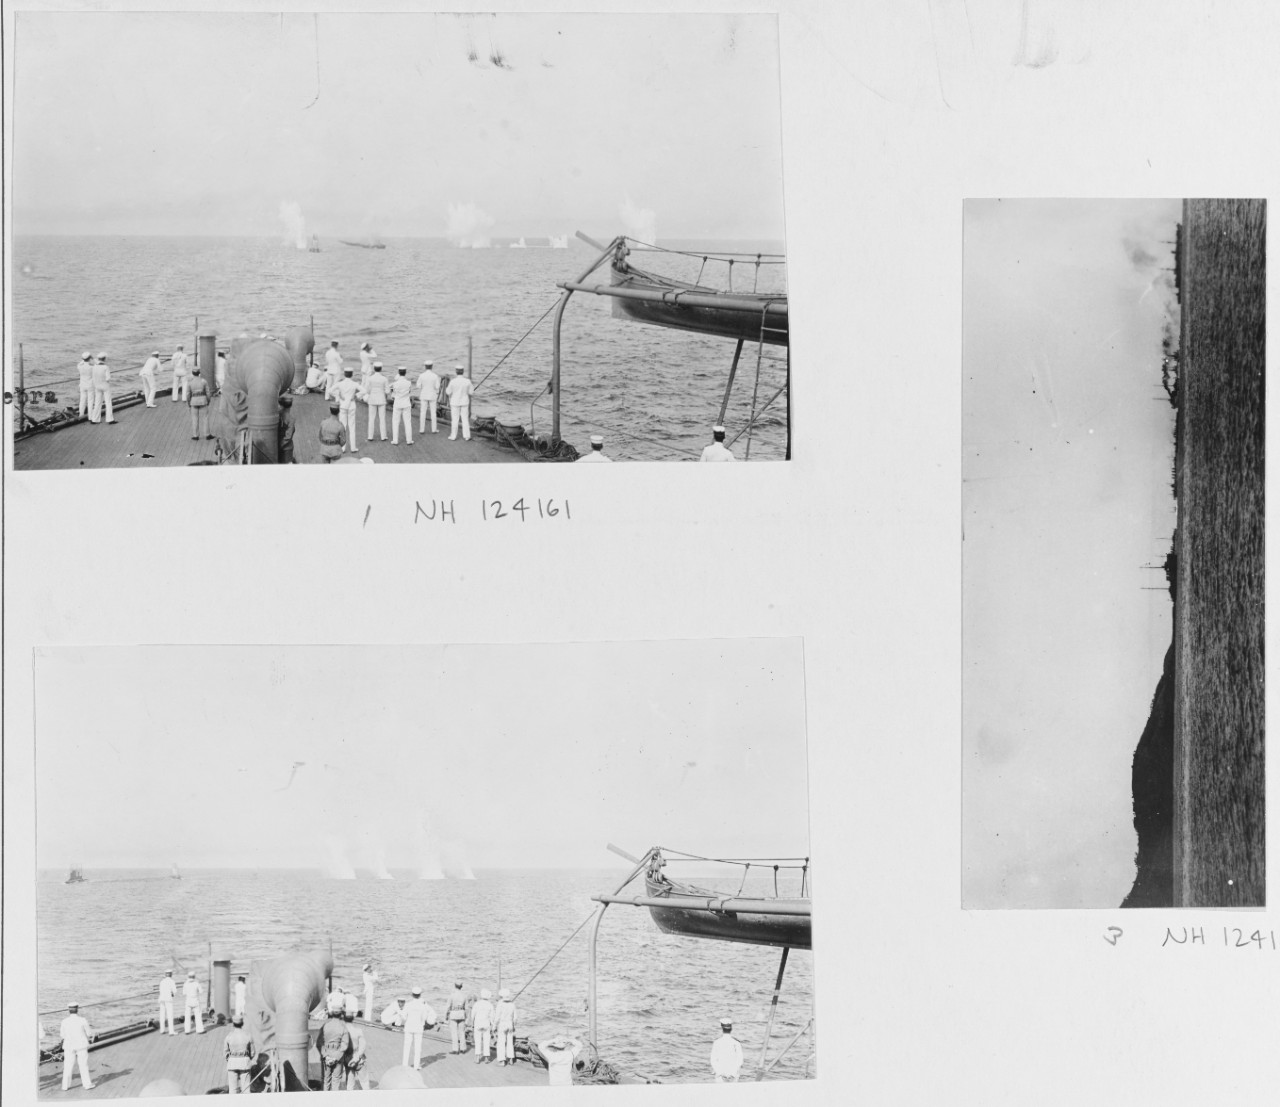 Division Practice, 1914. USS FLORIDA towing